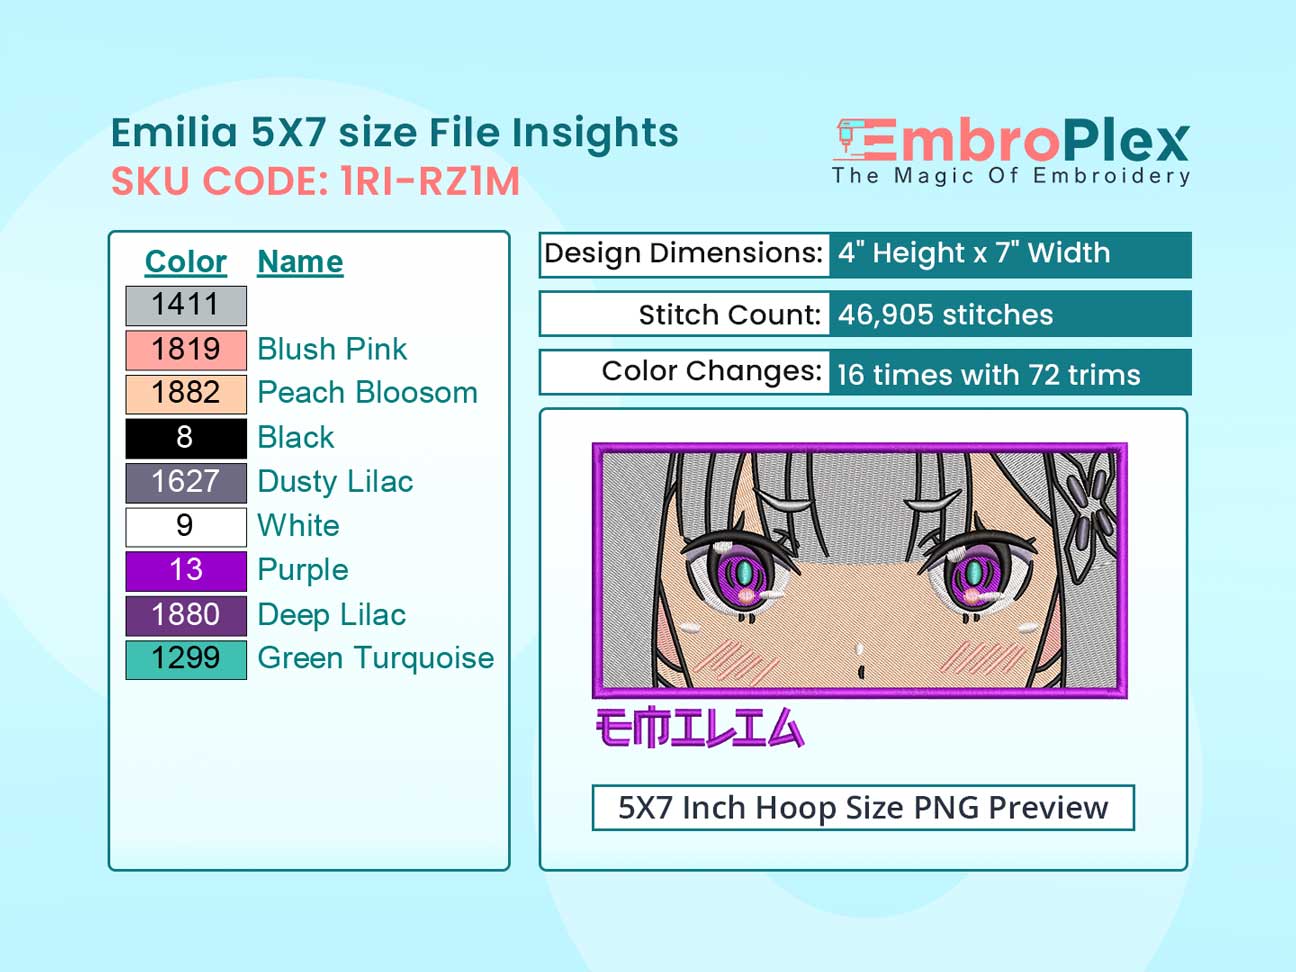 Anime-Inspired Emilia Embroidery Design File - 5x7 Inch hoop Size Variation overview image